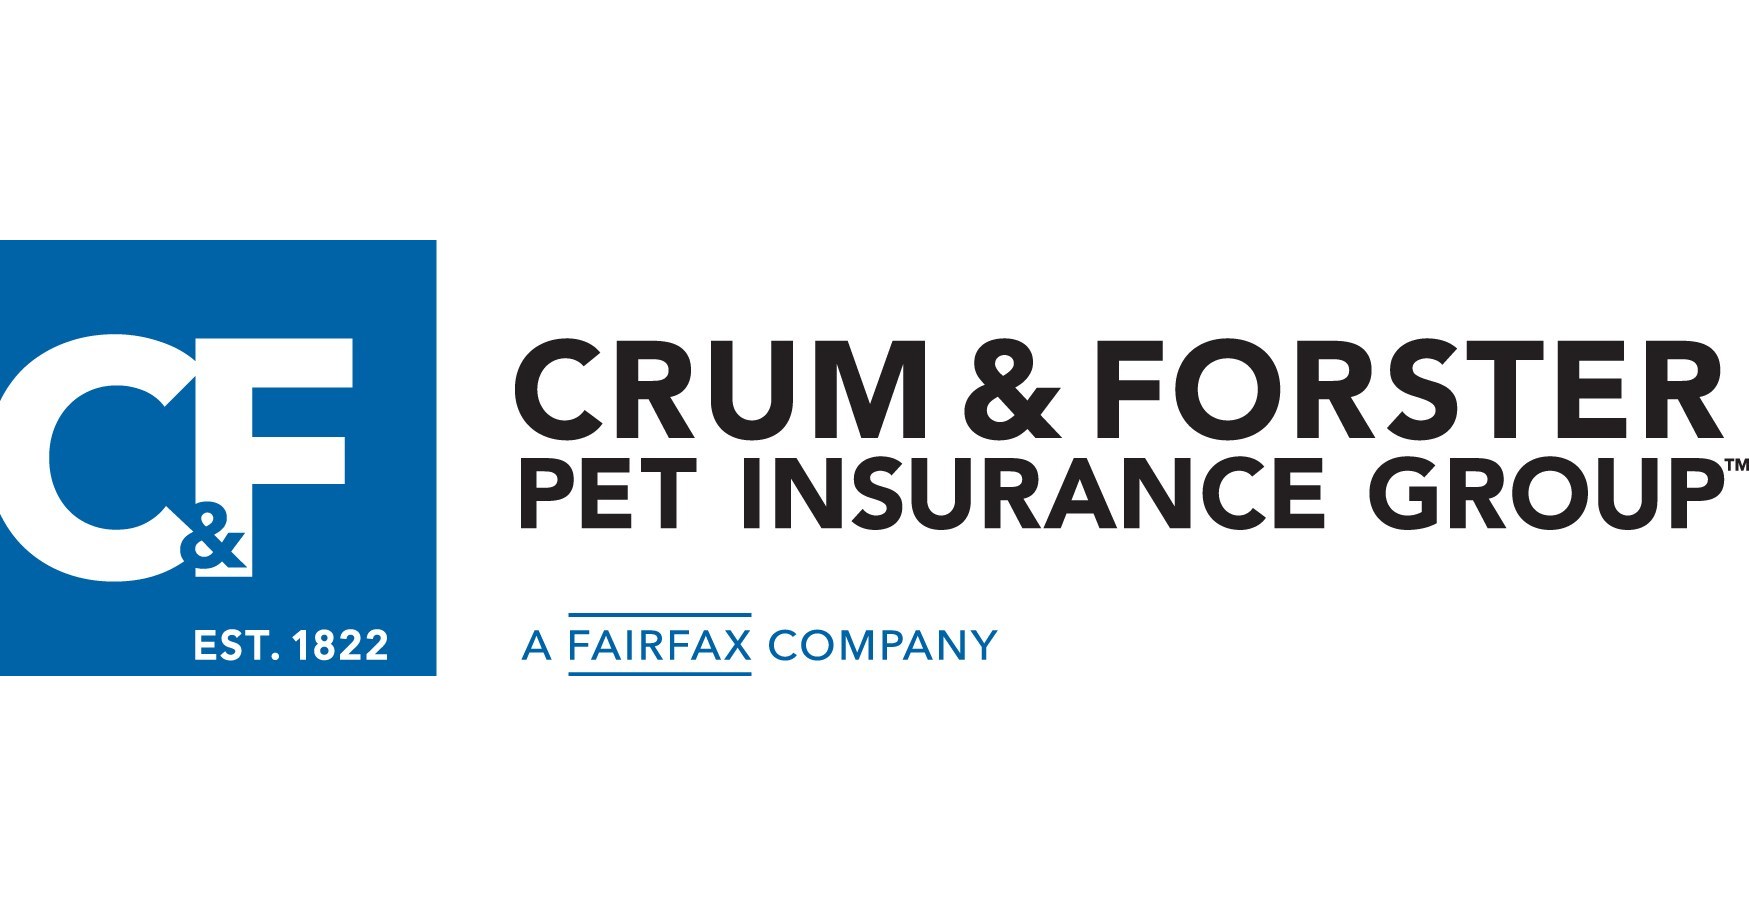 Crum & Forster Pet Insurance Group Adds Claims Estimate Hotline for